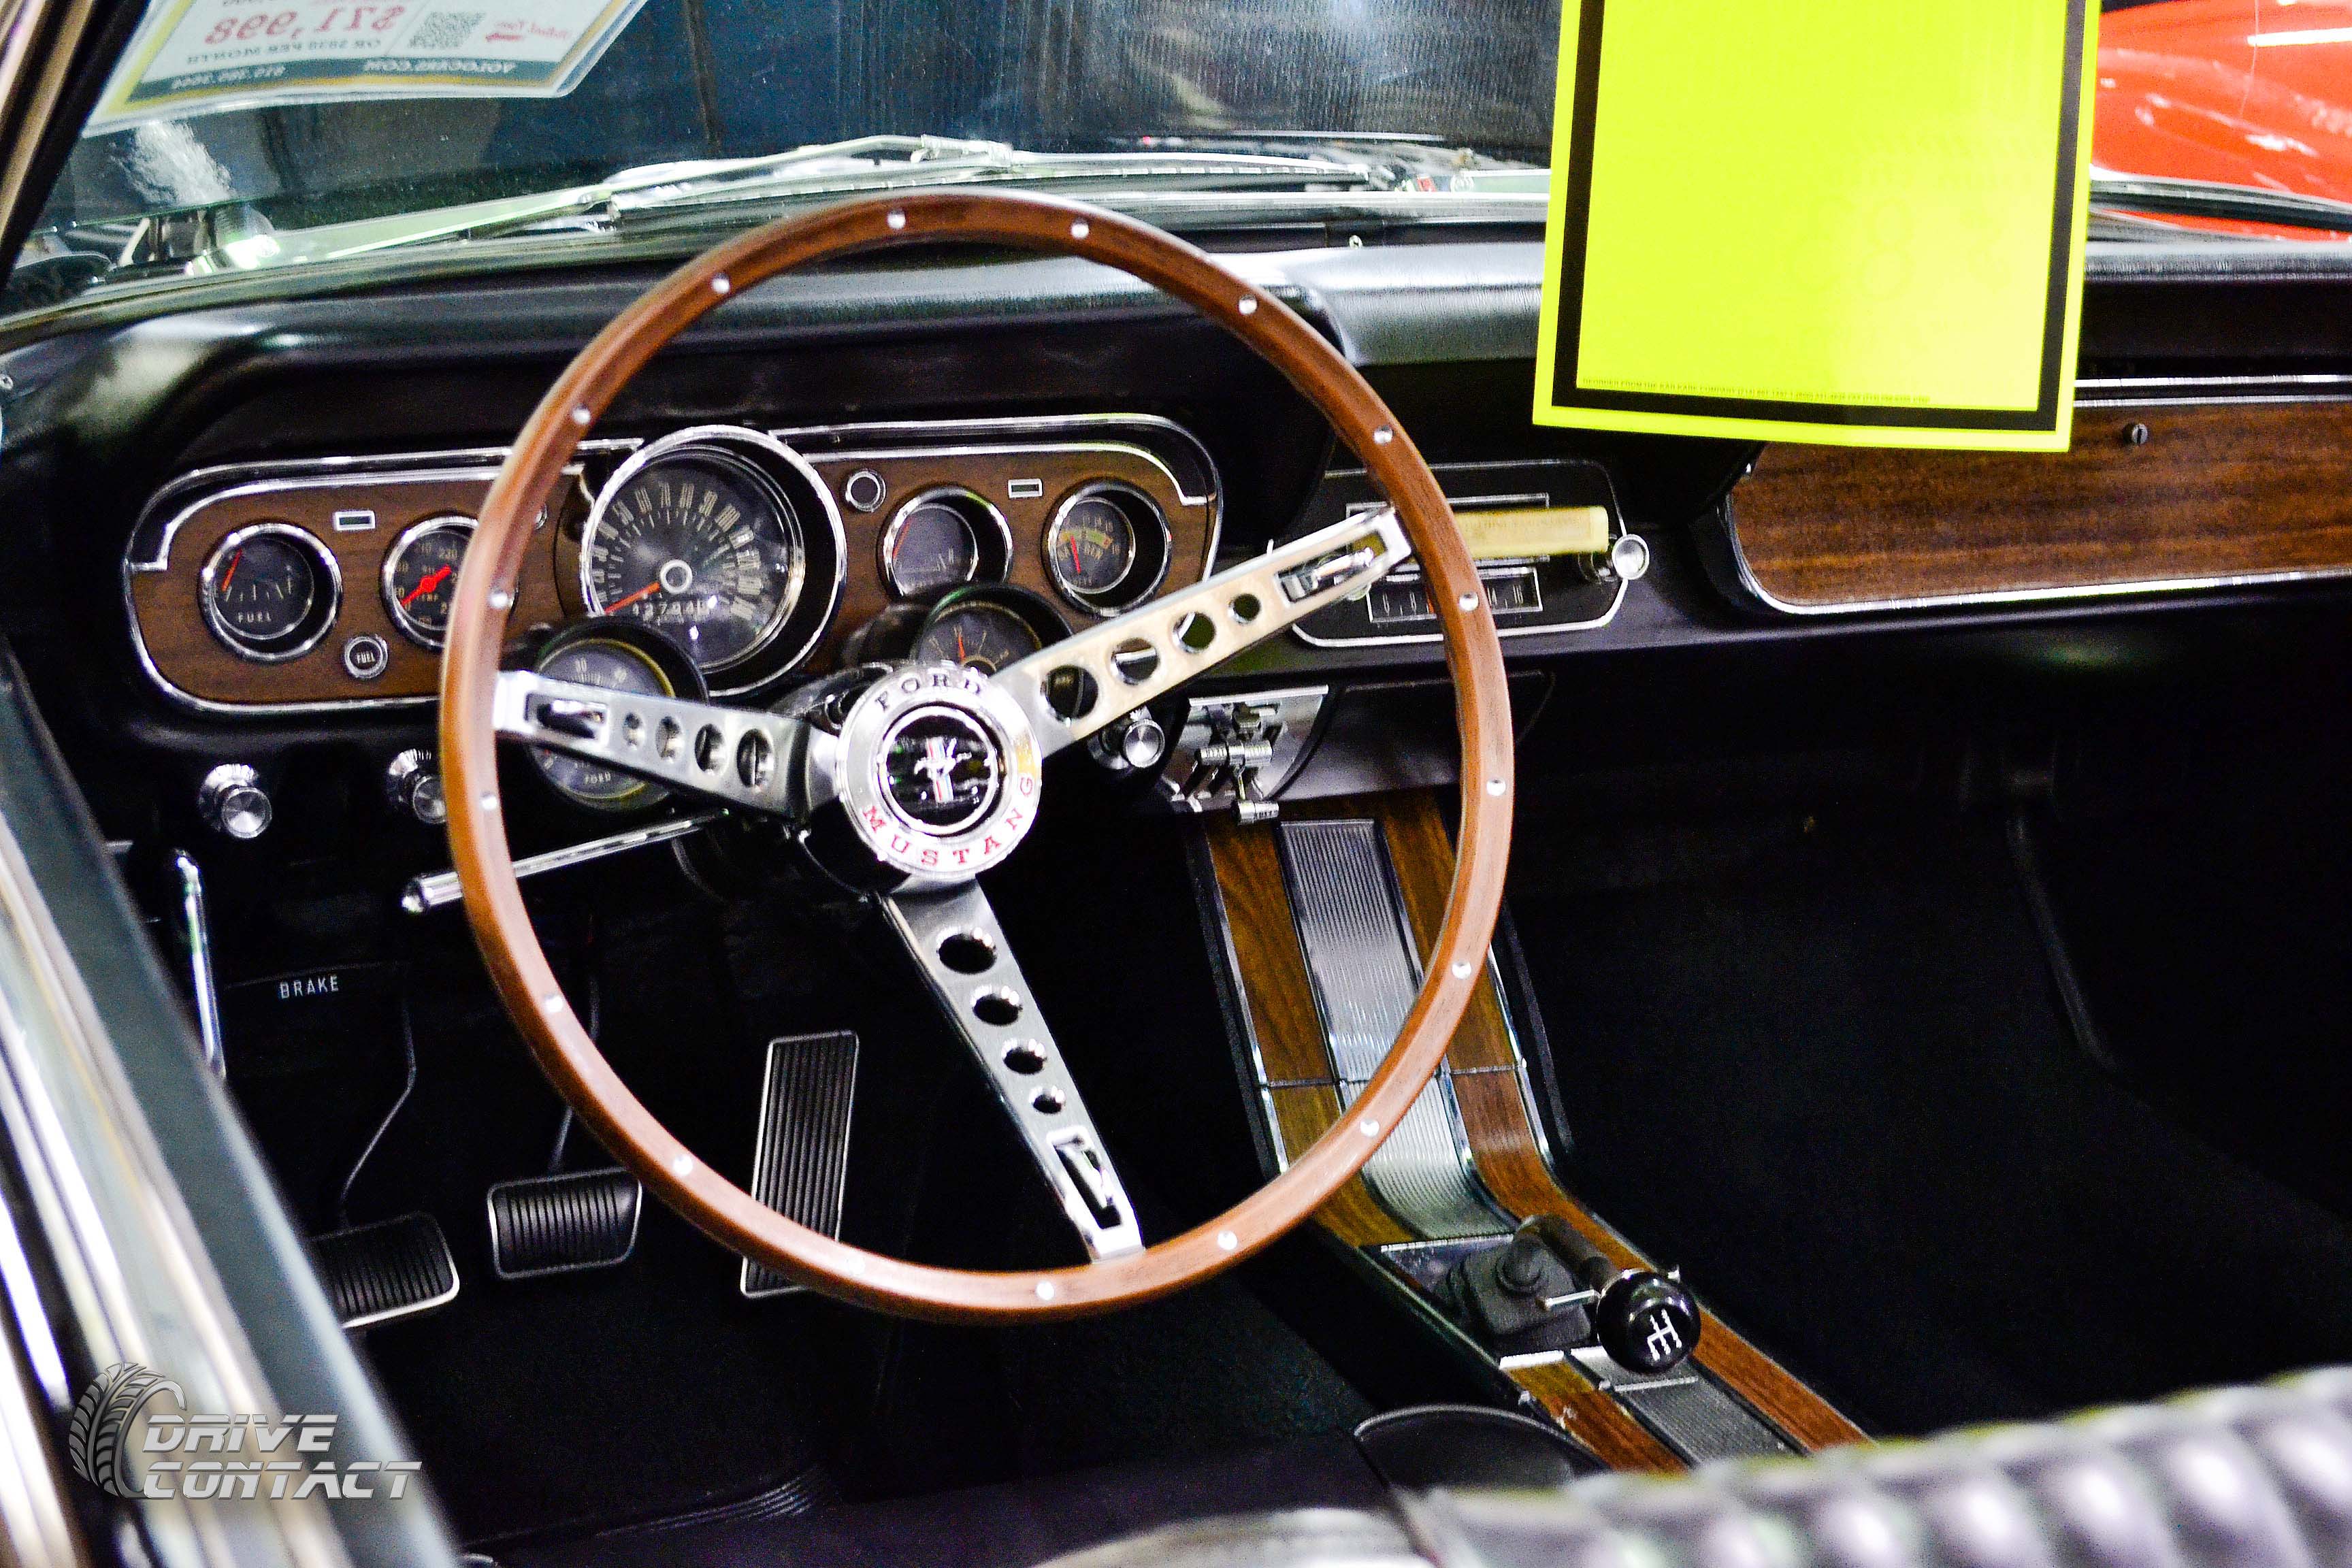 Ford Mustang interior - Volo Auto Museum